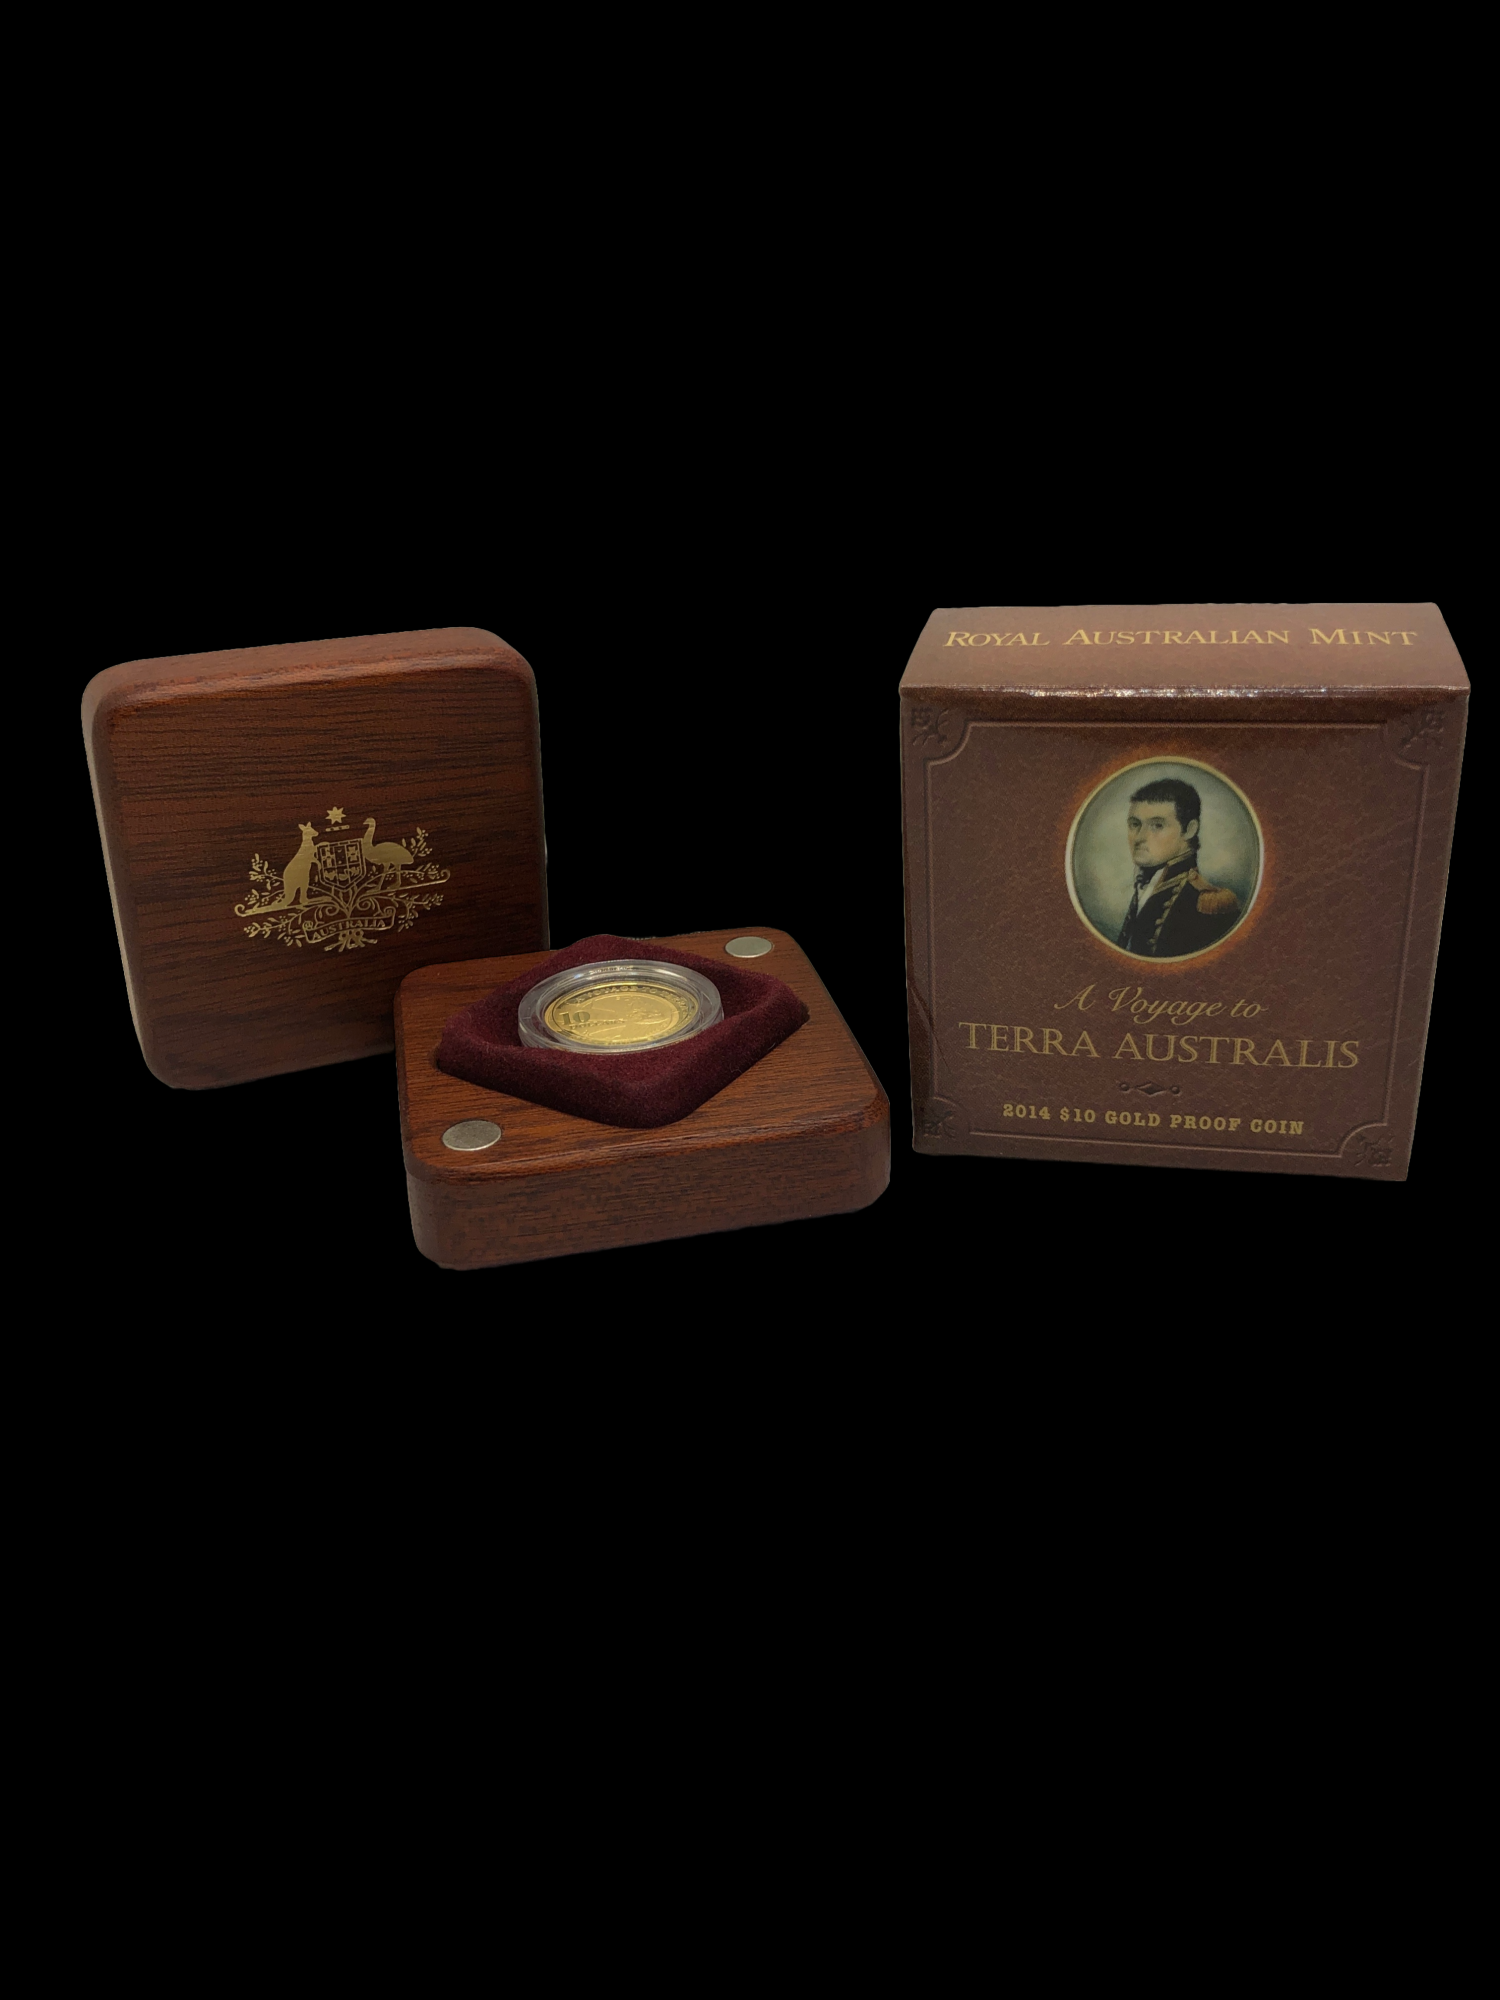 Thumbnail for 2014 A Voyage to Terra Australis $10.00 Gold Proof